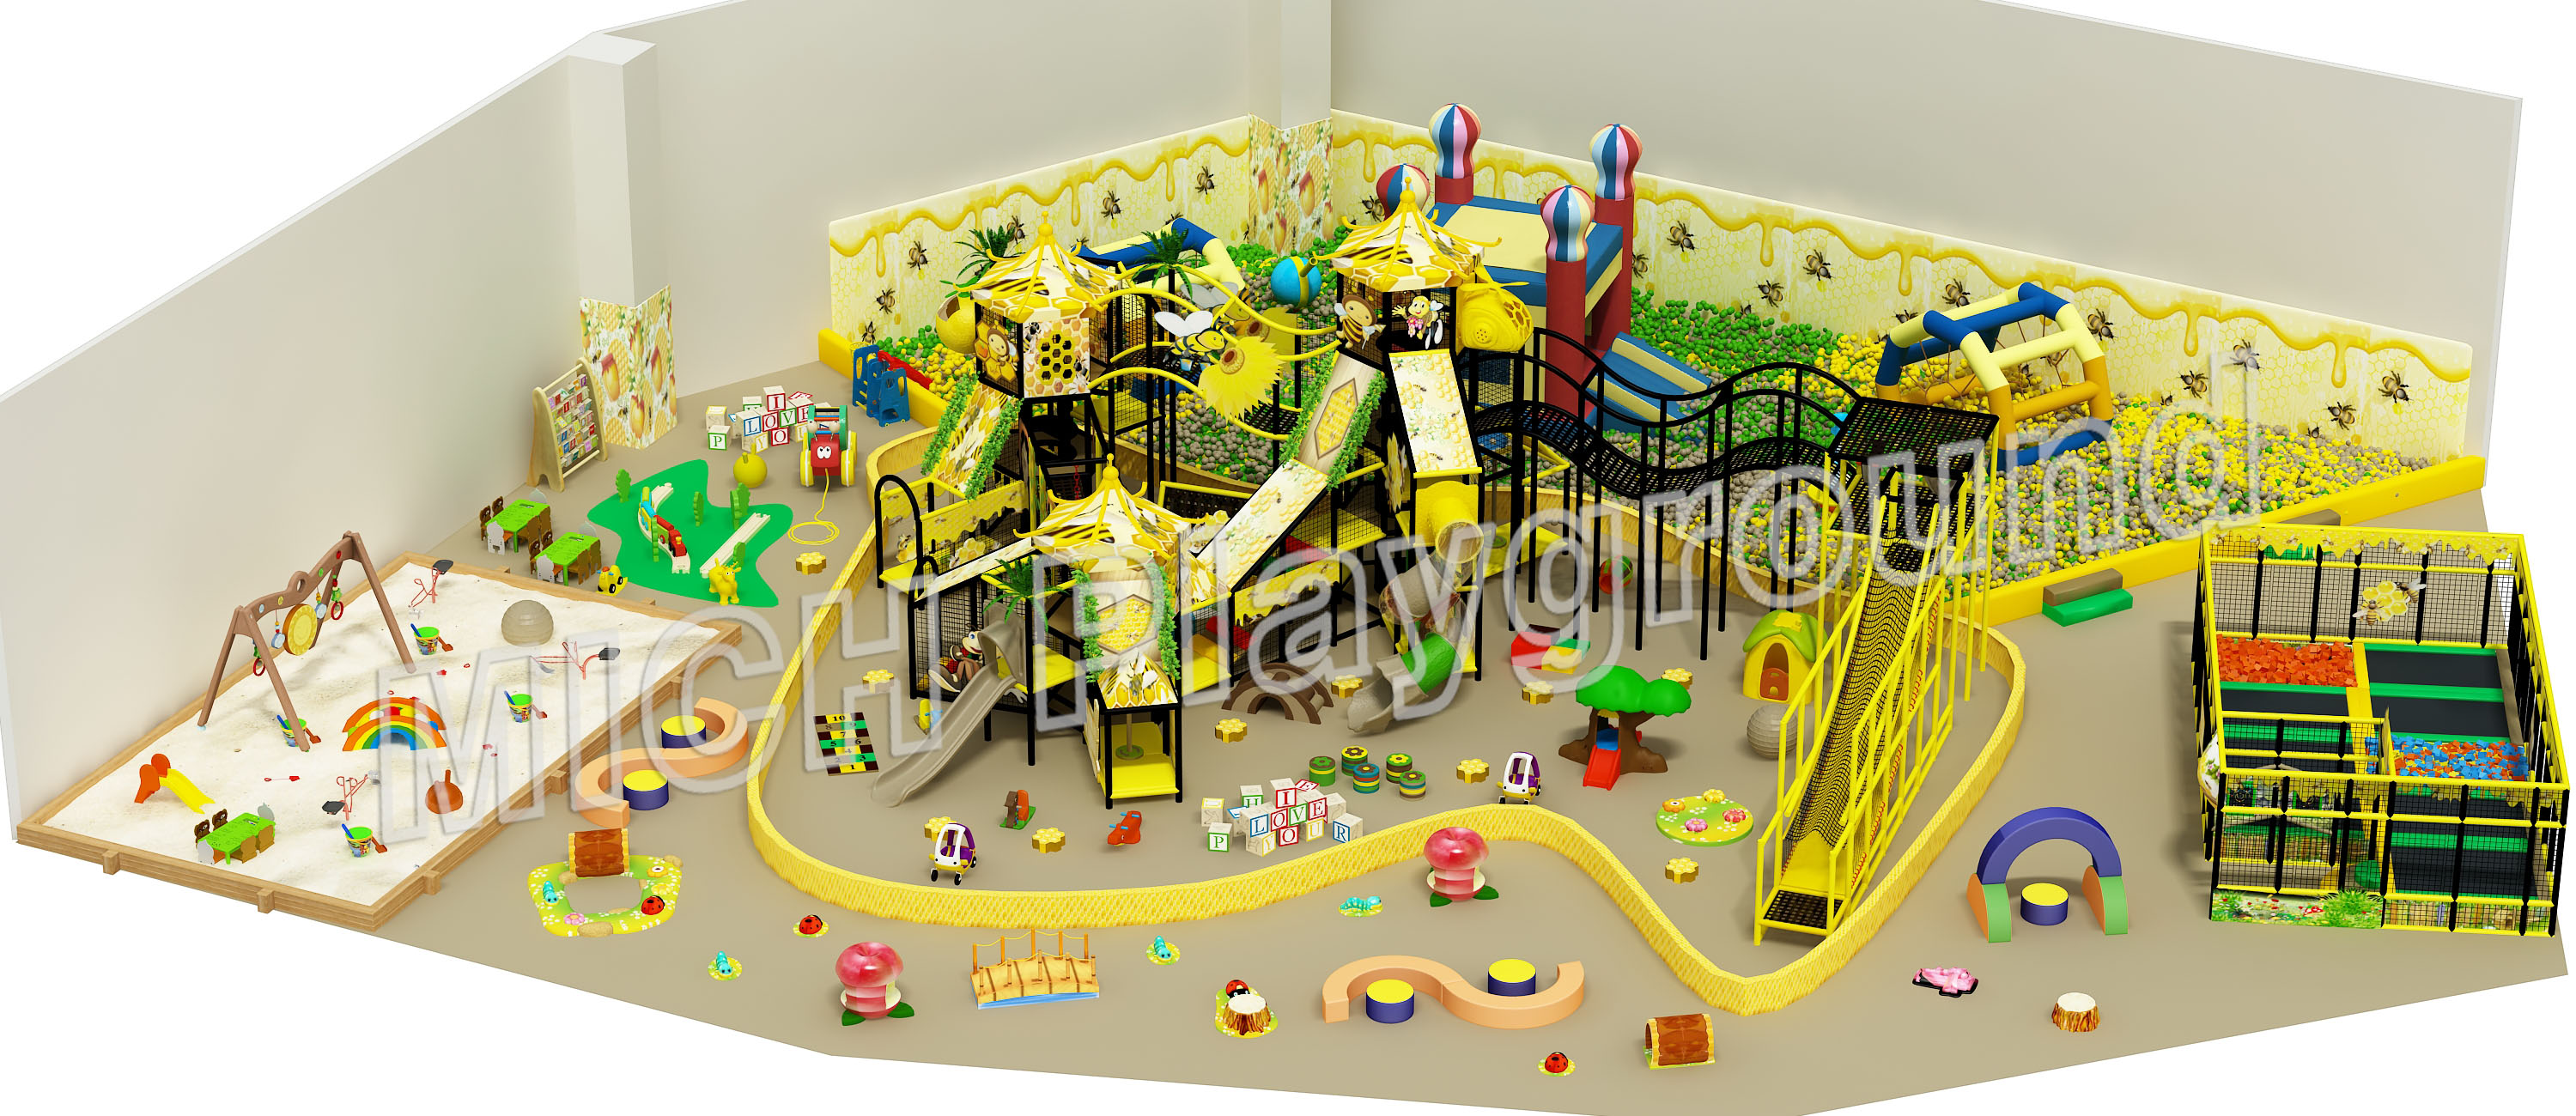 Toddler Indoor Soft Play Area with Trampoline